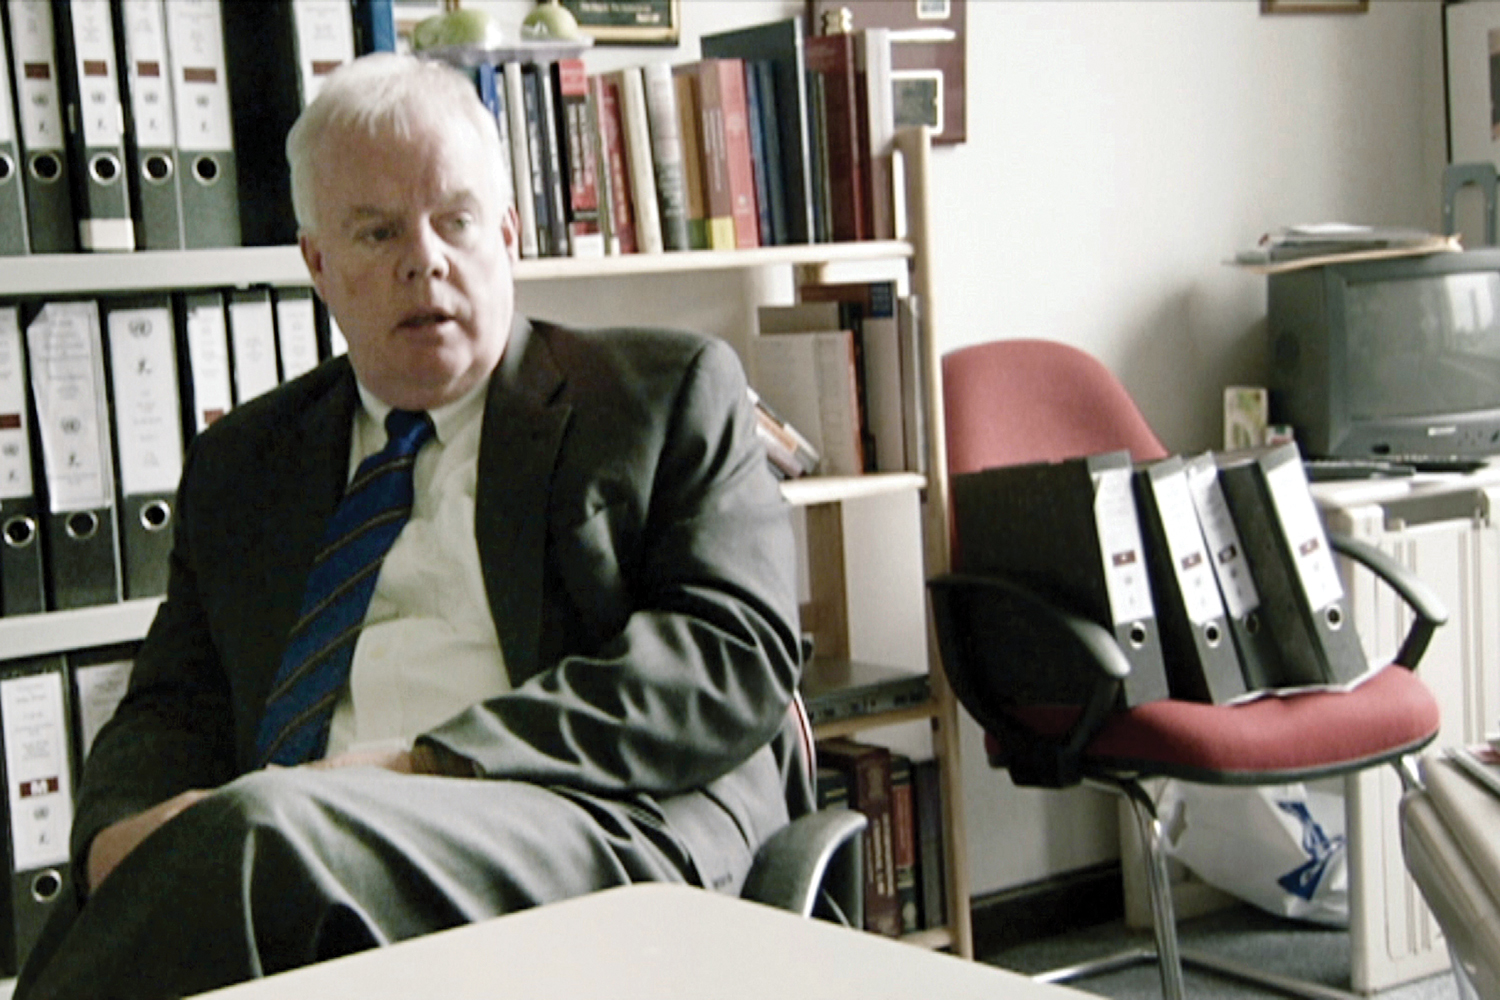 Dermot Groome ’85, pictured in a scene from Frontline’s documentary The Trial of Ratko Mladić.